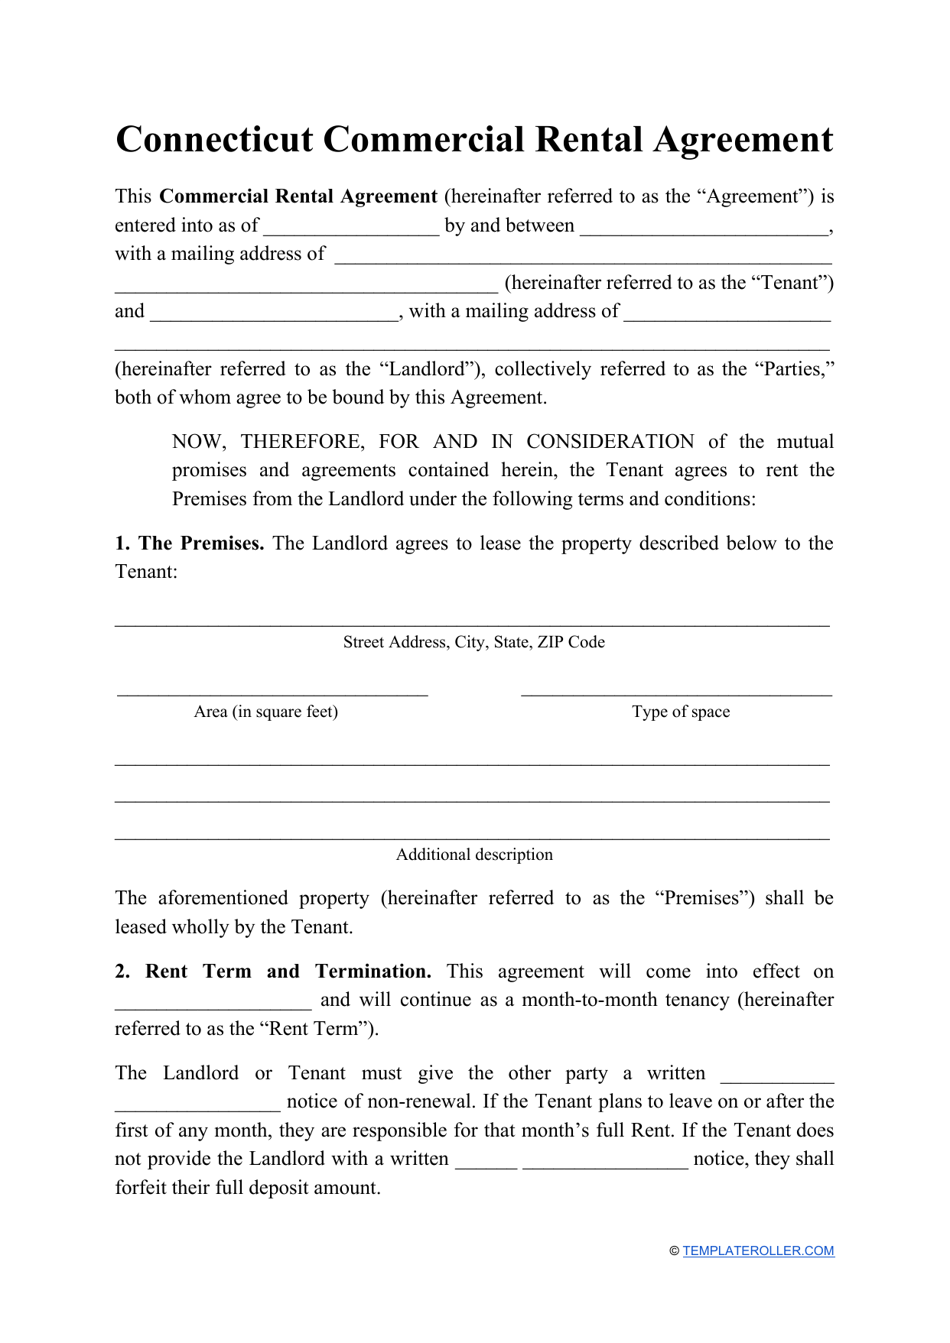 Commercial Rental Agreement Template - Connecticut, Page 1